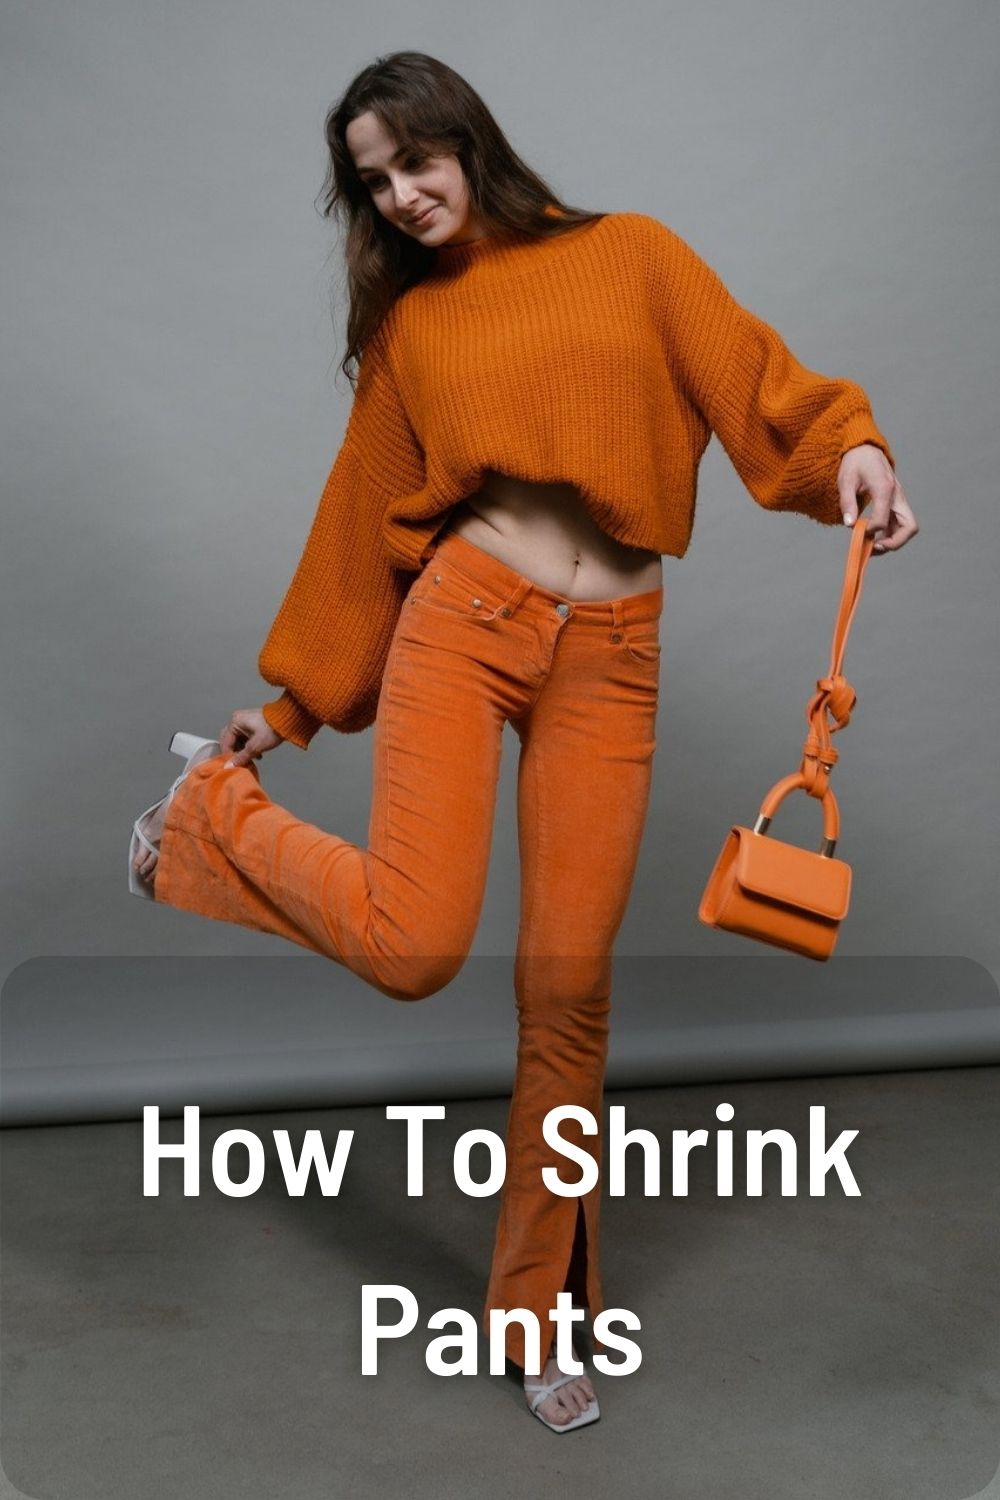 How To Shrink Pants